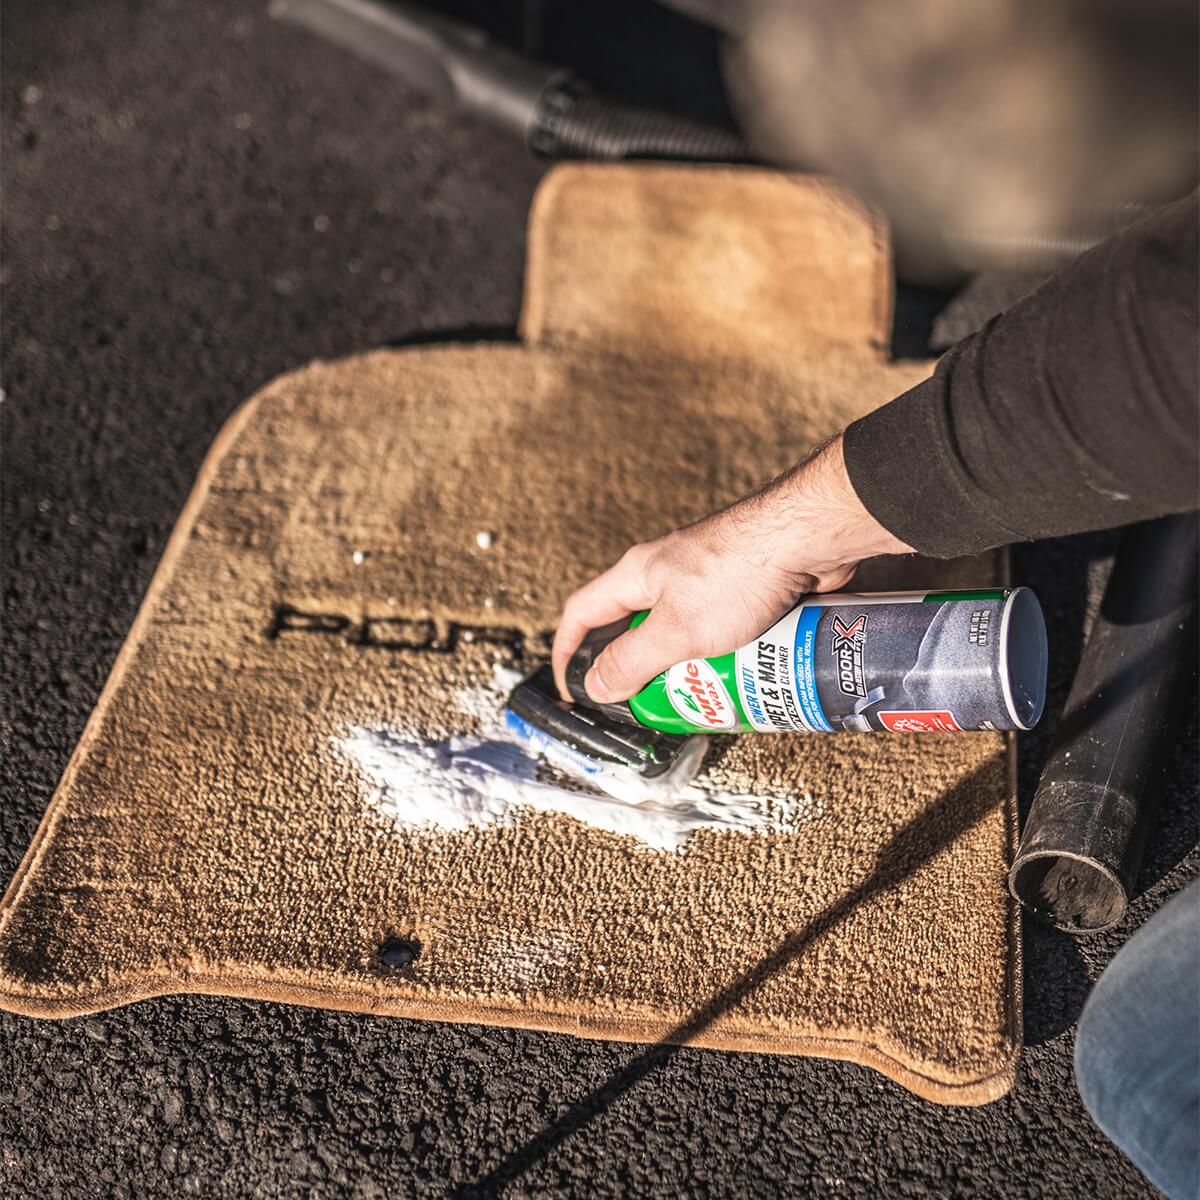 What are the best carpet cleaning products for your car?